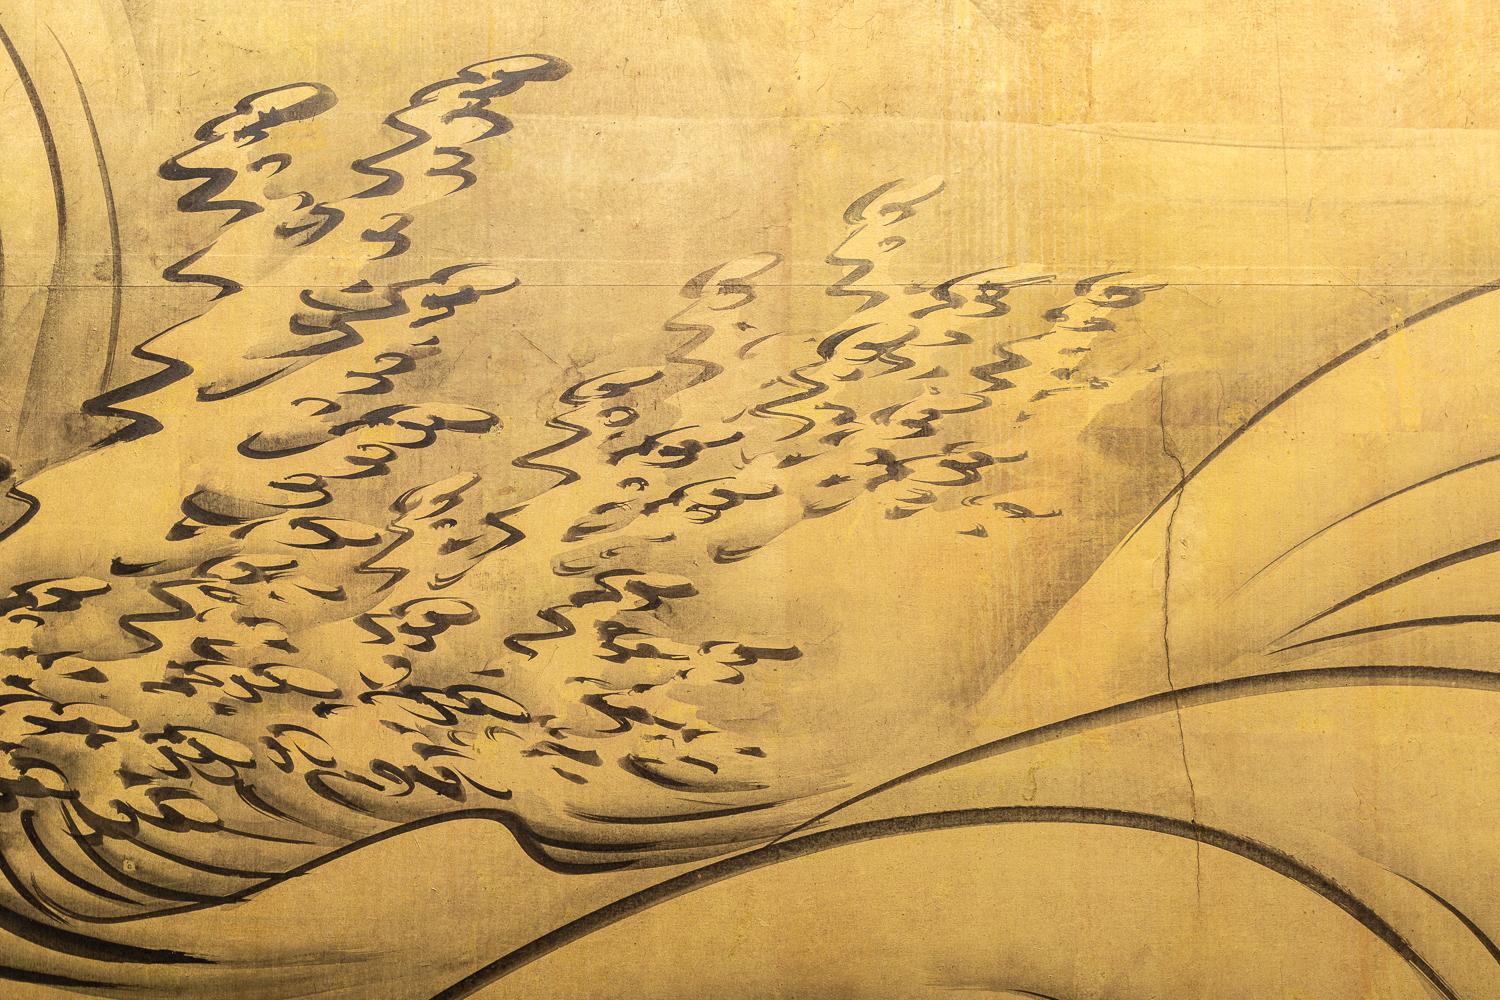 Ink on gold leaf with a silk brocade border. Signature reads: Nakajima Raishou (1796-1872). Student of Maruyama Okyo (one of Japan's most famous artists).